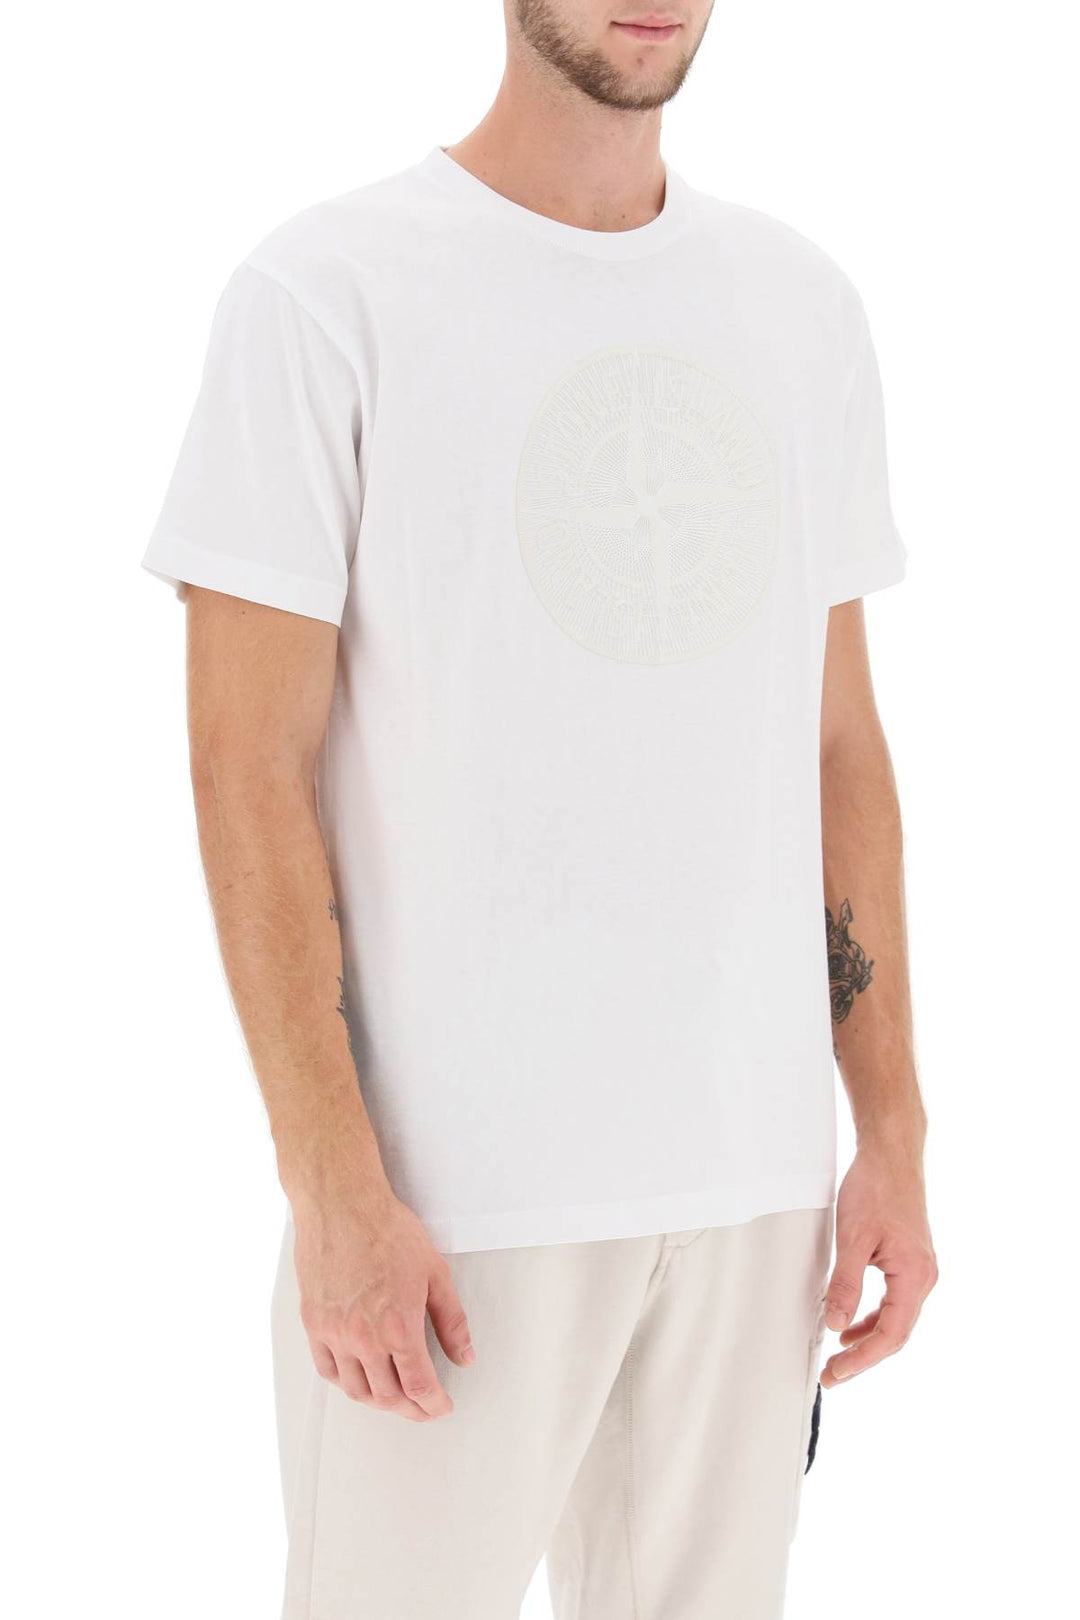 Stone Island T Shirt With Print On The Chest   Bianco